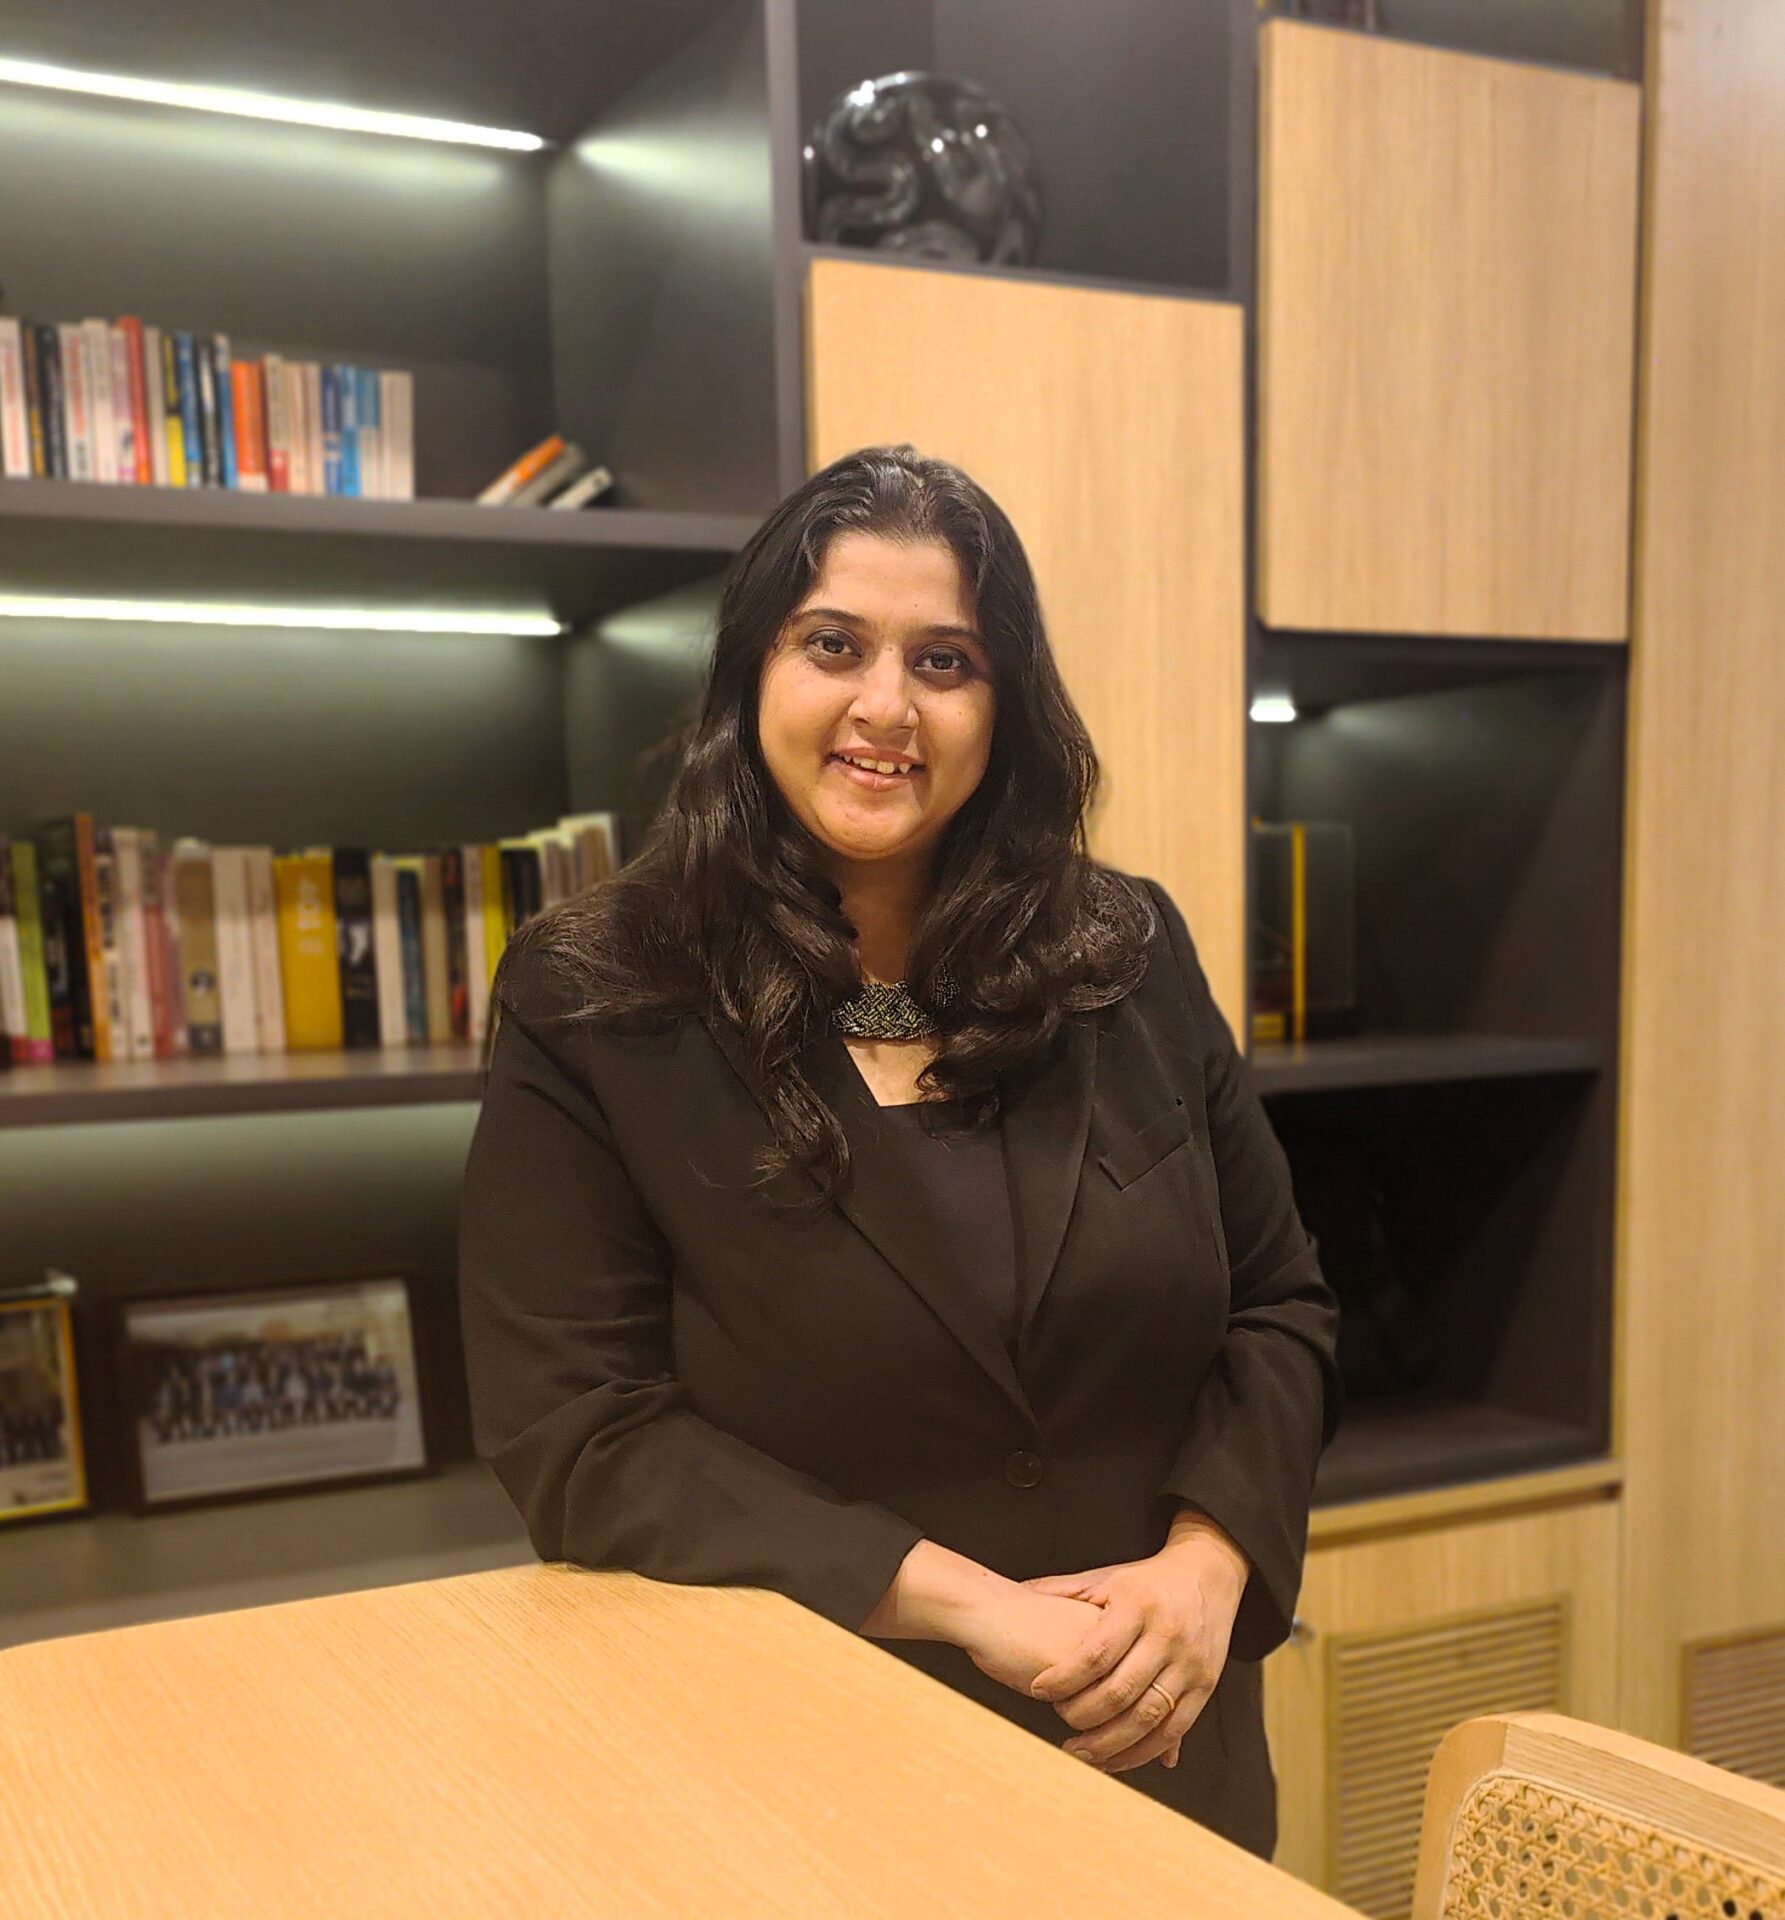 Pride Hotels Group appoints Ishita Nigam as Corporate Marketing Manager